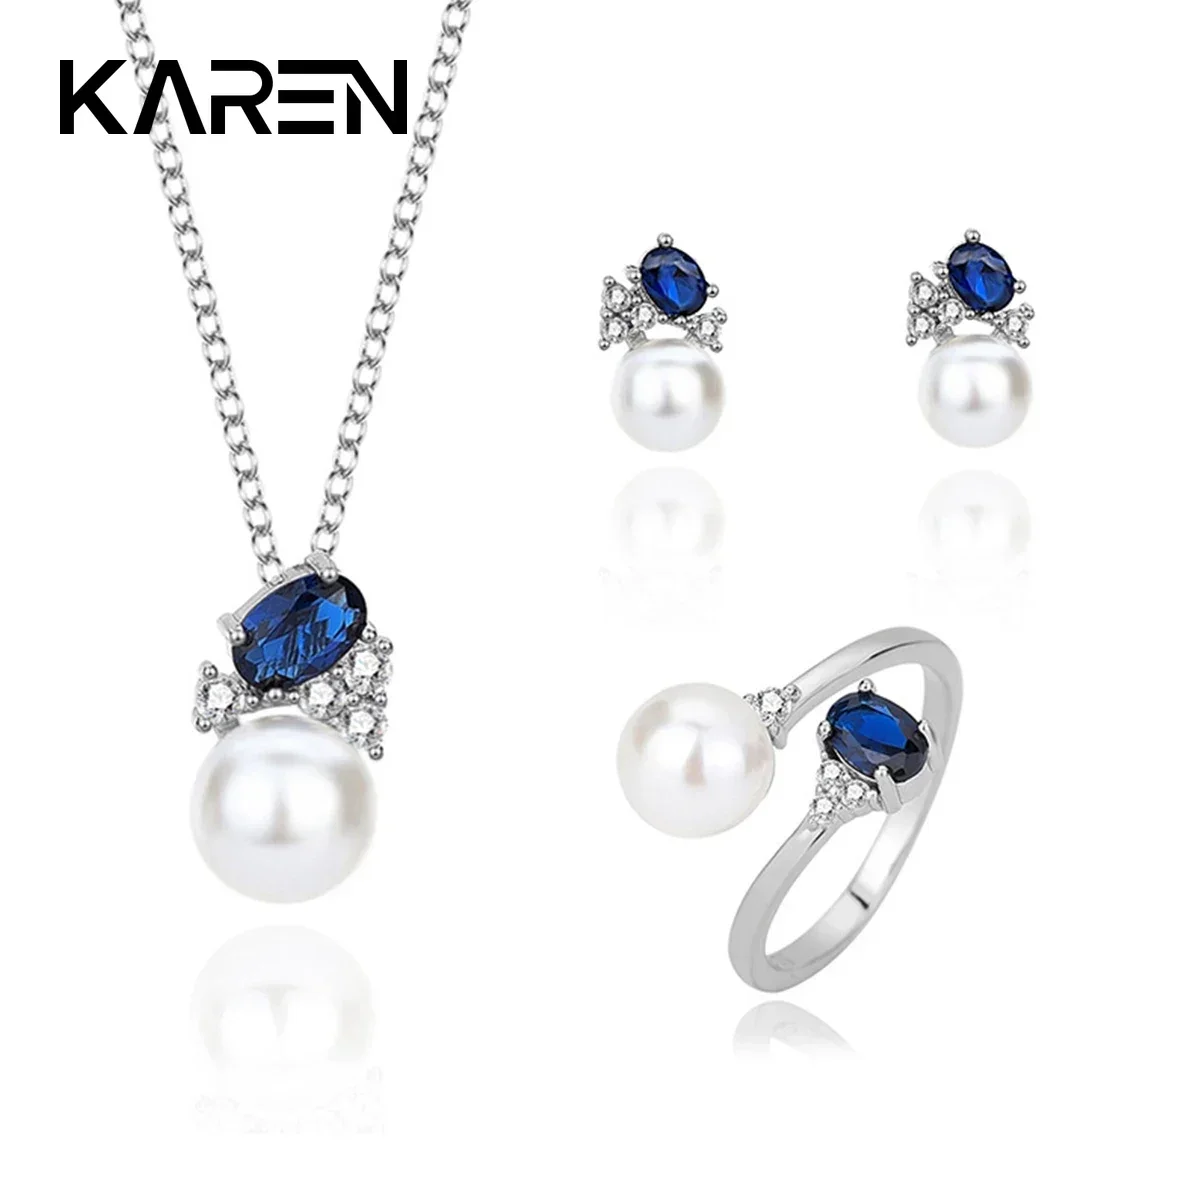 

KAREN S925 Sterling Silver Pearl Sapphire Fashion Trend Necklace Ring Earring Set for Valentine's Day Gift Women's Jewelry